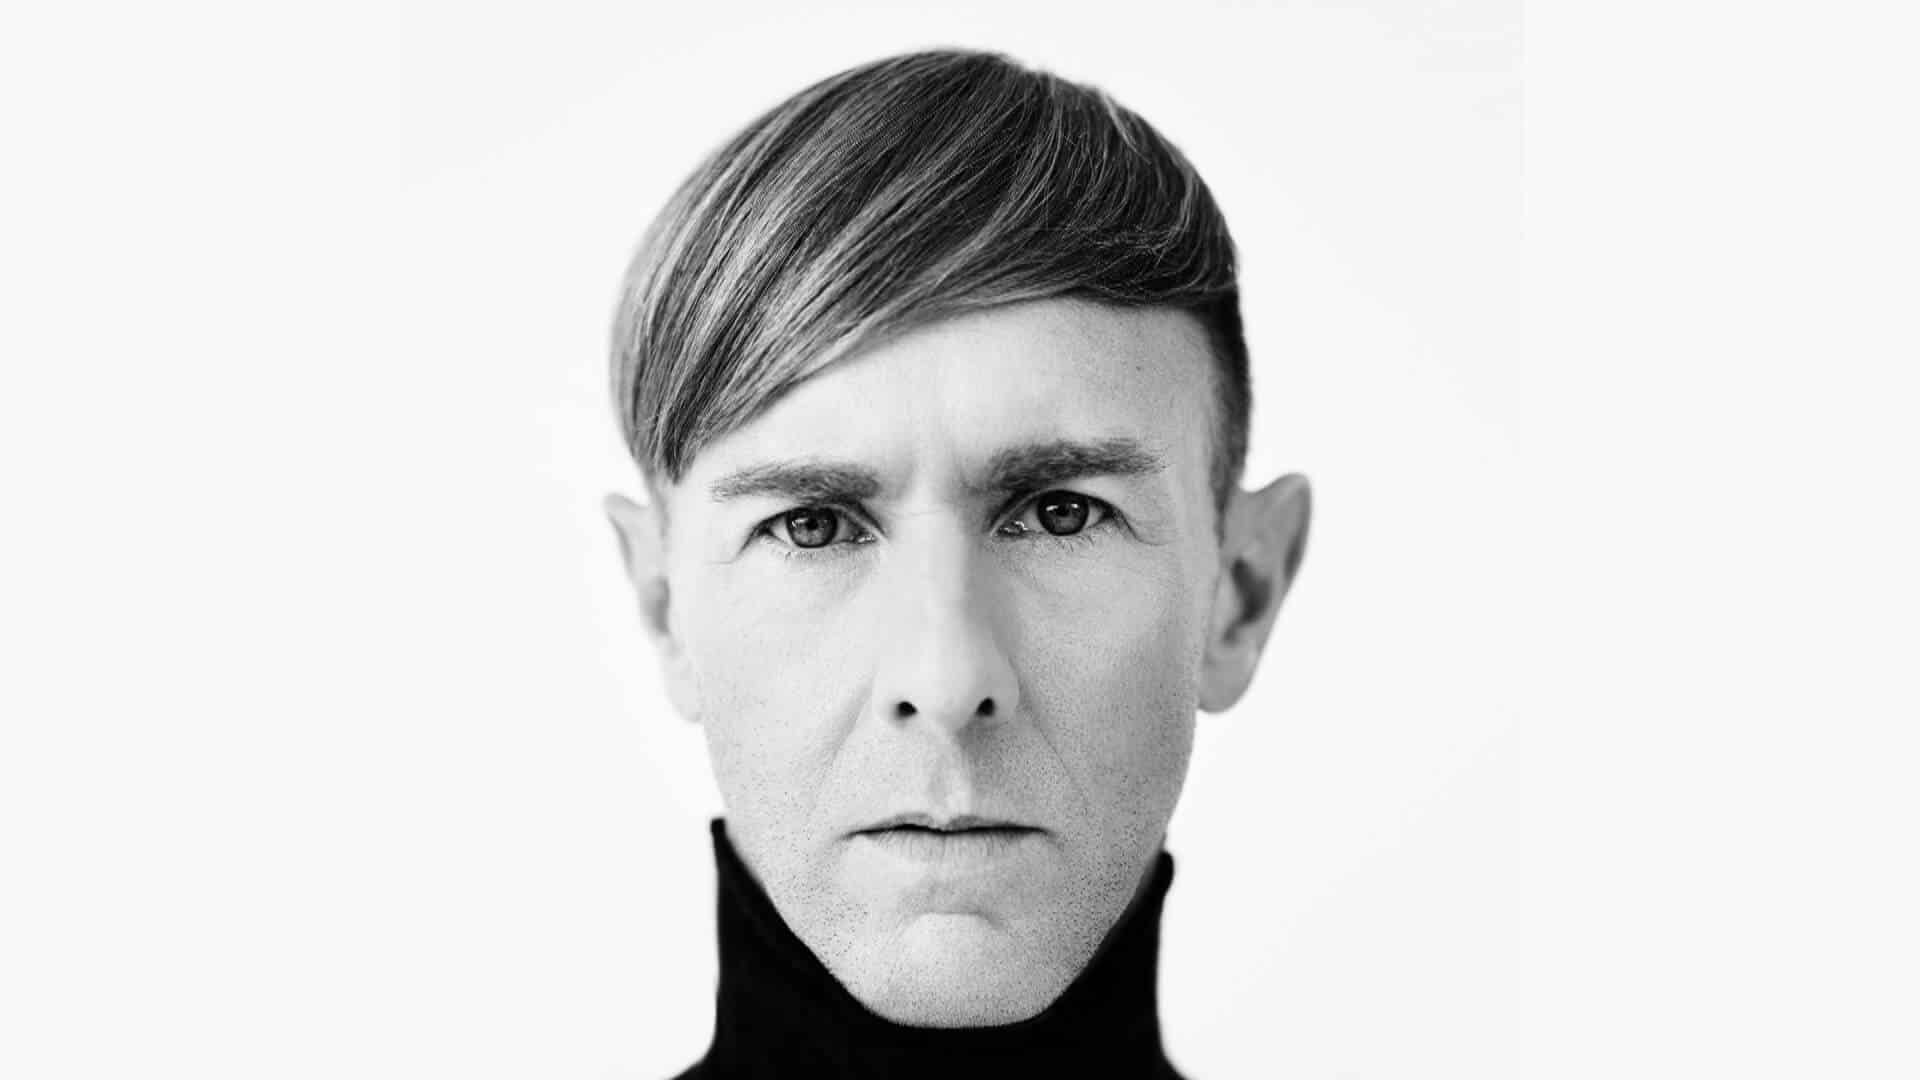 Richie Hawtin is back to the dancefloor with new EP after 20 years